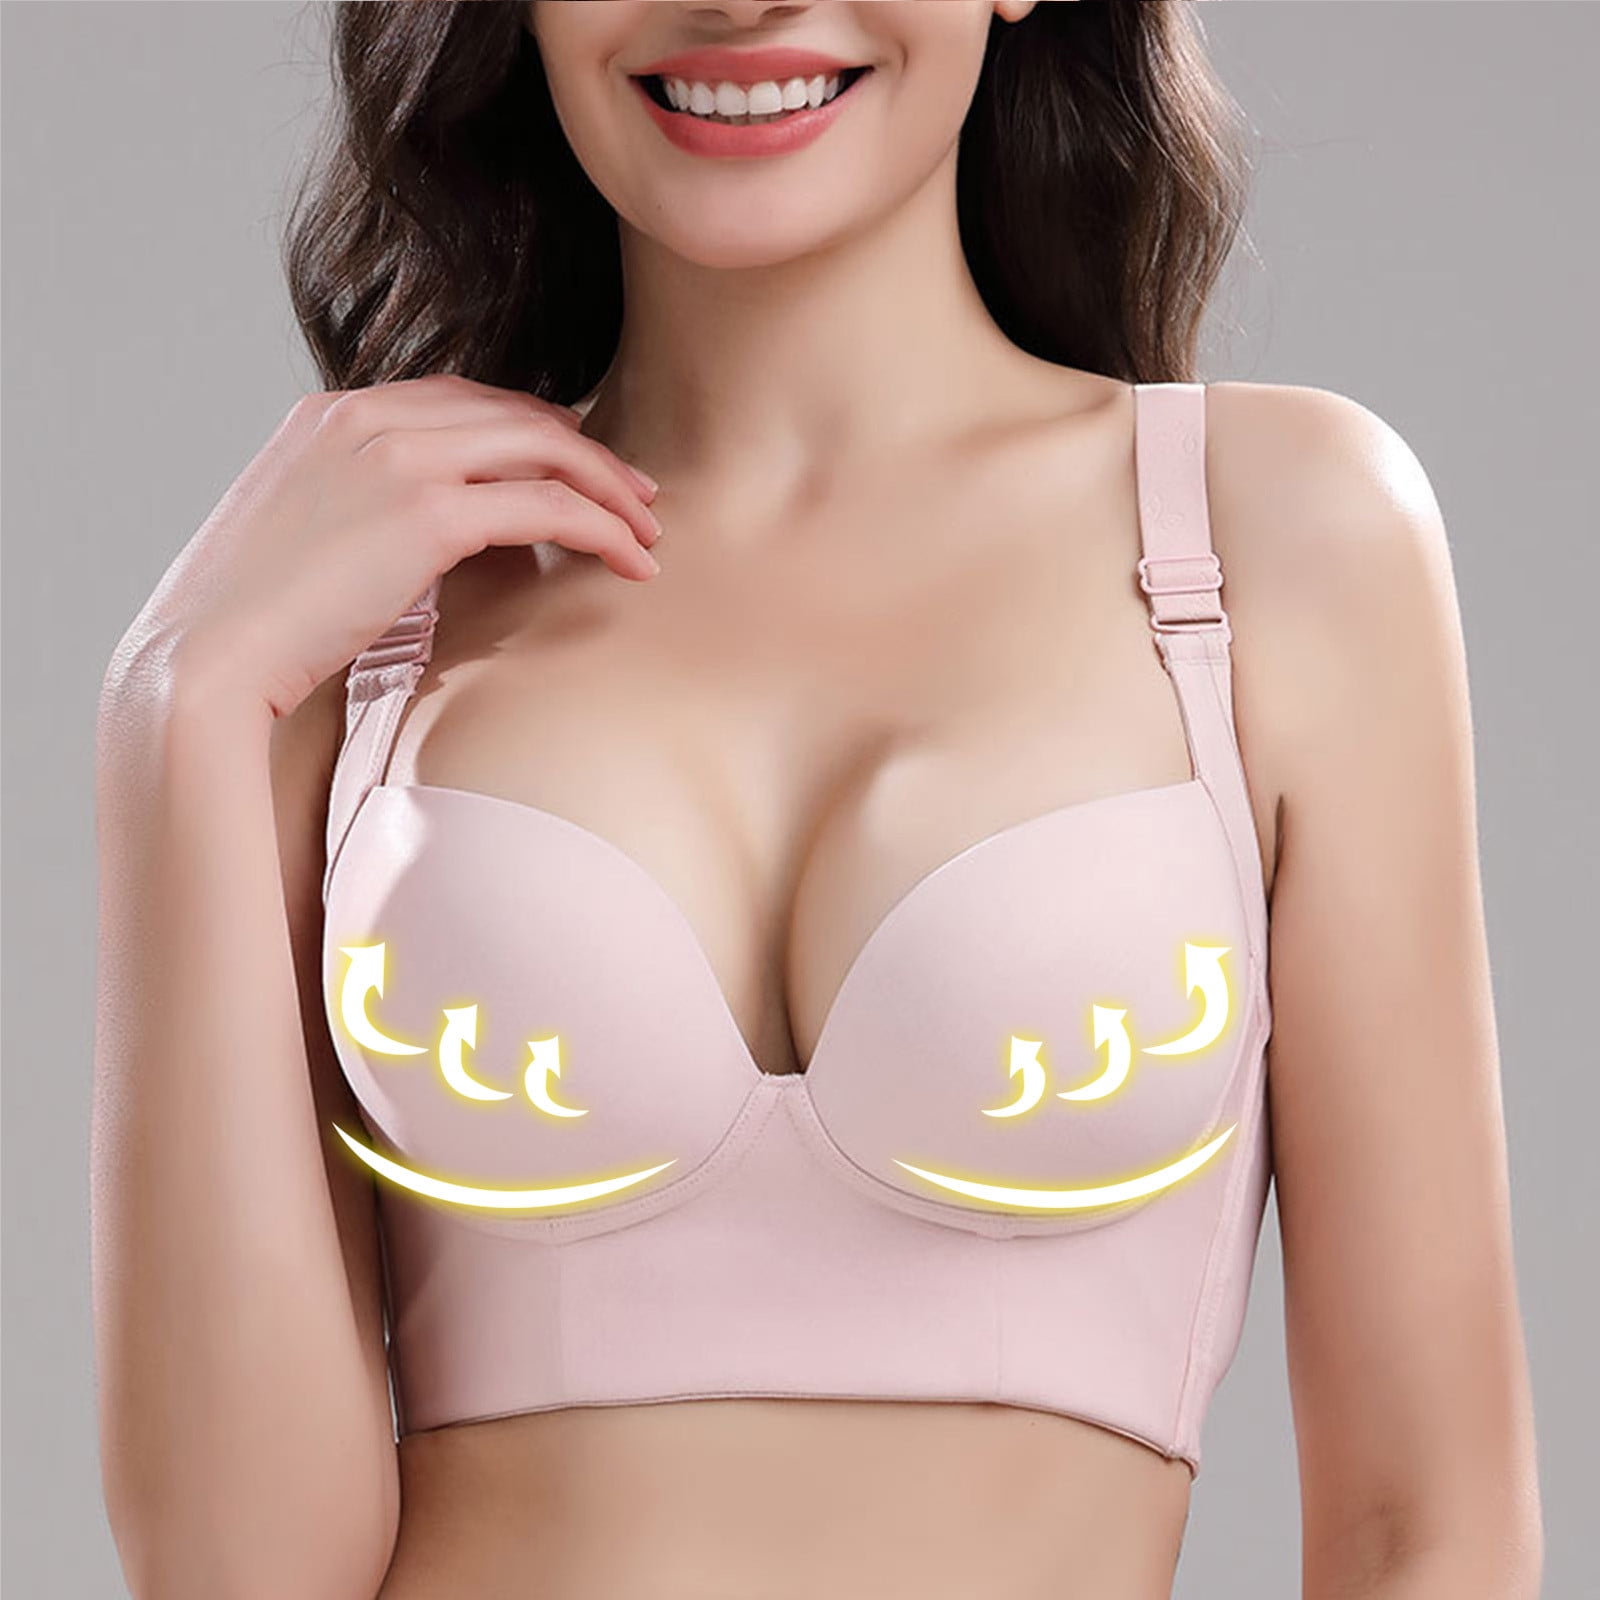 Wholesale bra to support sagging breasts For Supportive Underwear